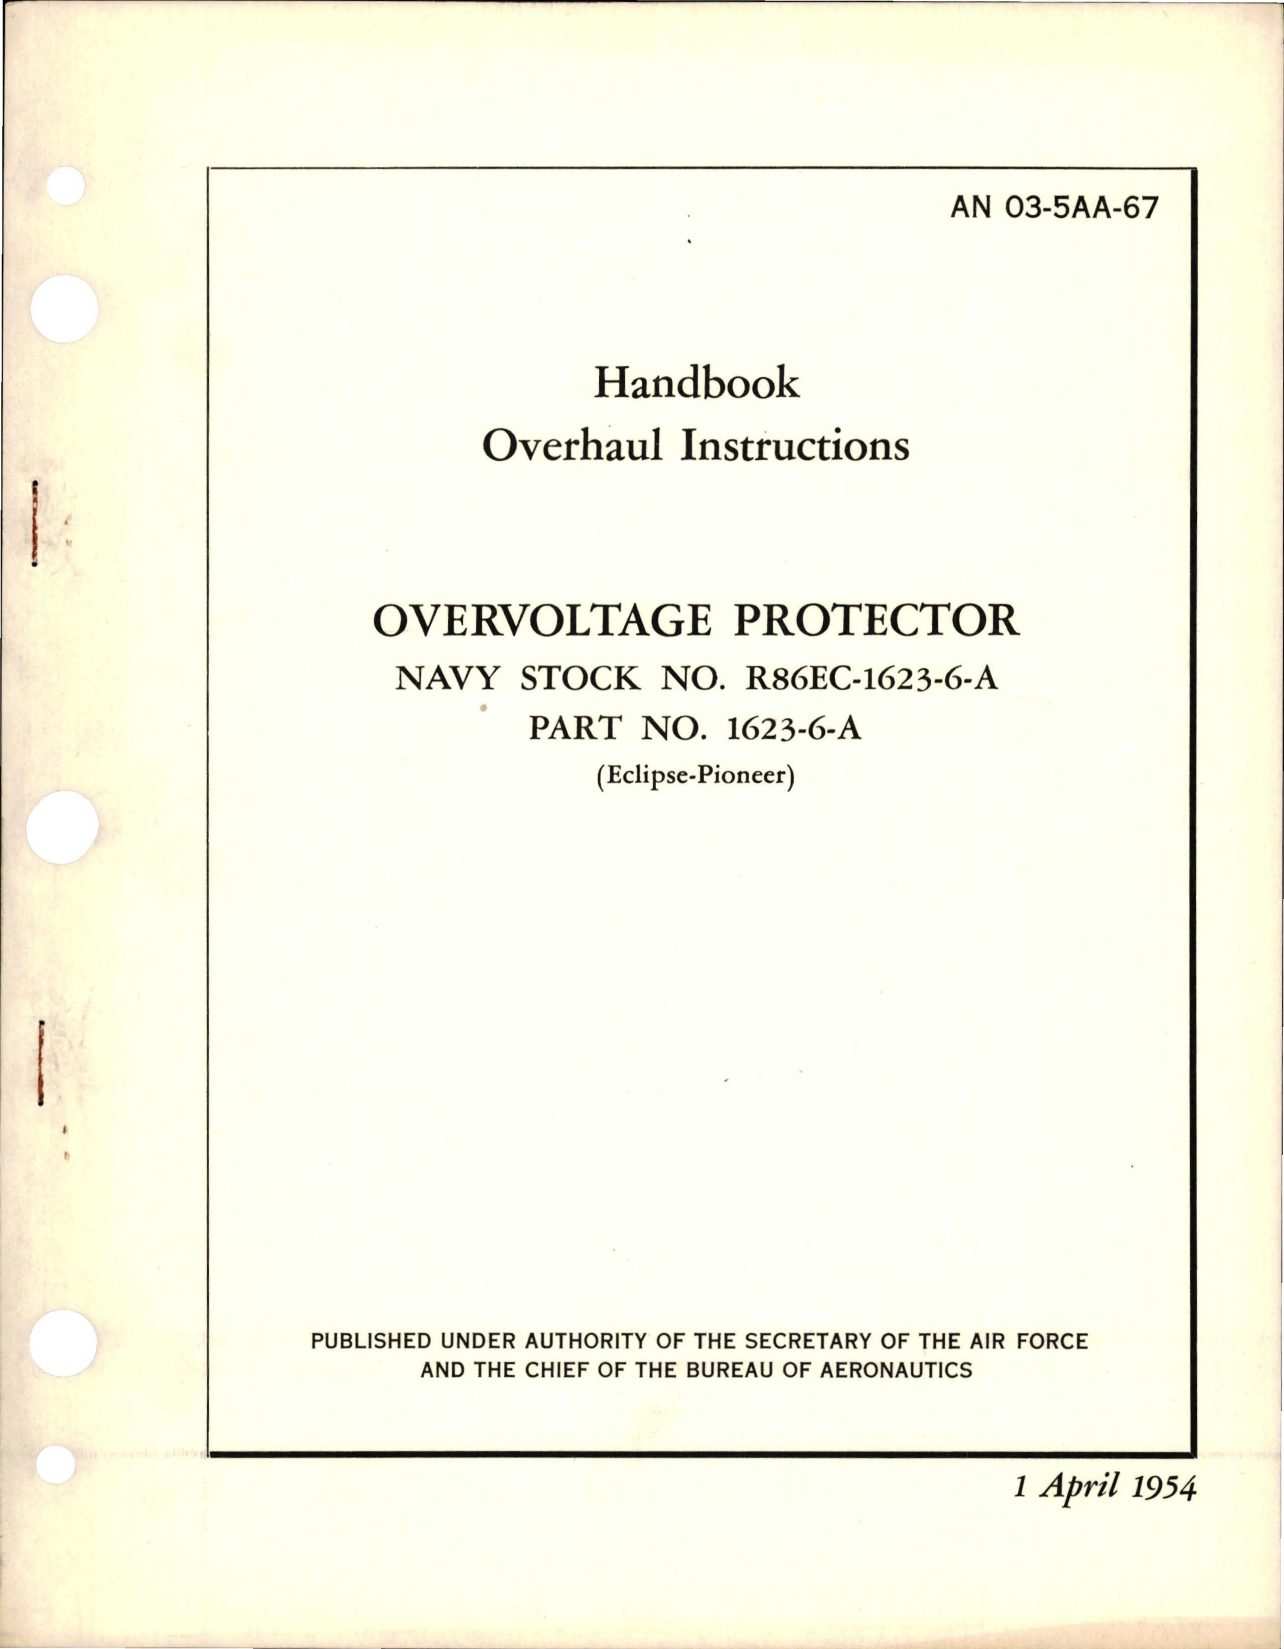 Sample page 1 from AirCorps Library document: Overhaul Instructions for Overvoltage Protector - Part 1623-6-A